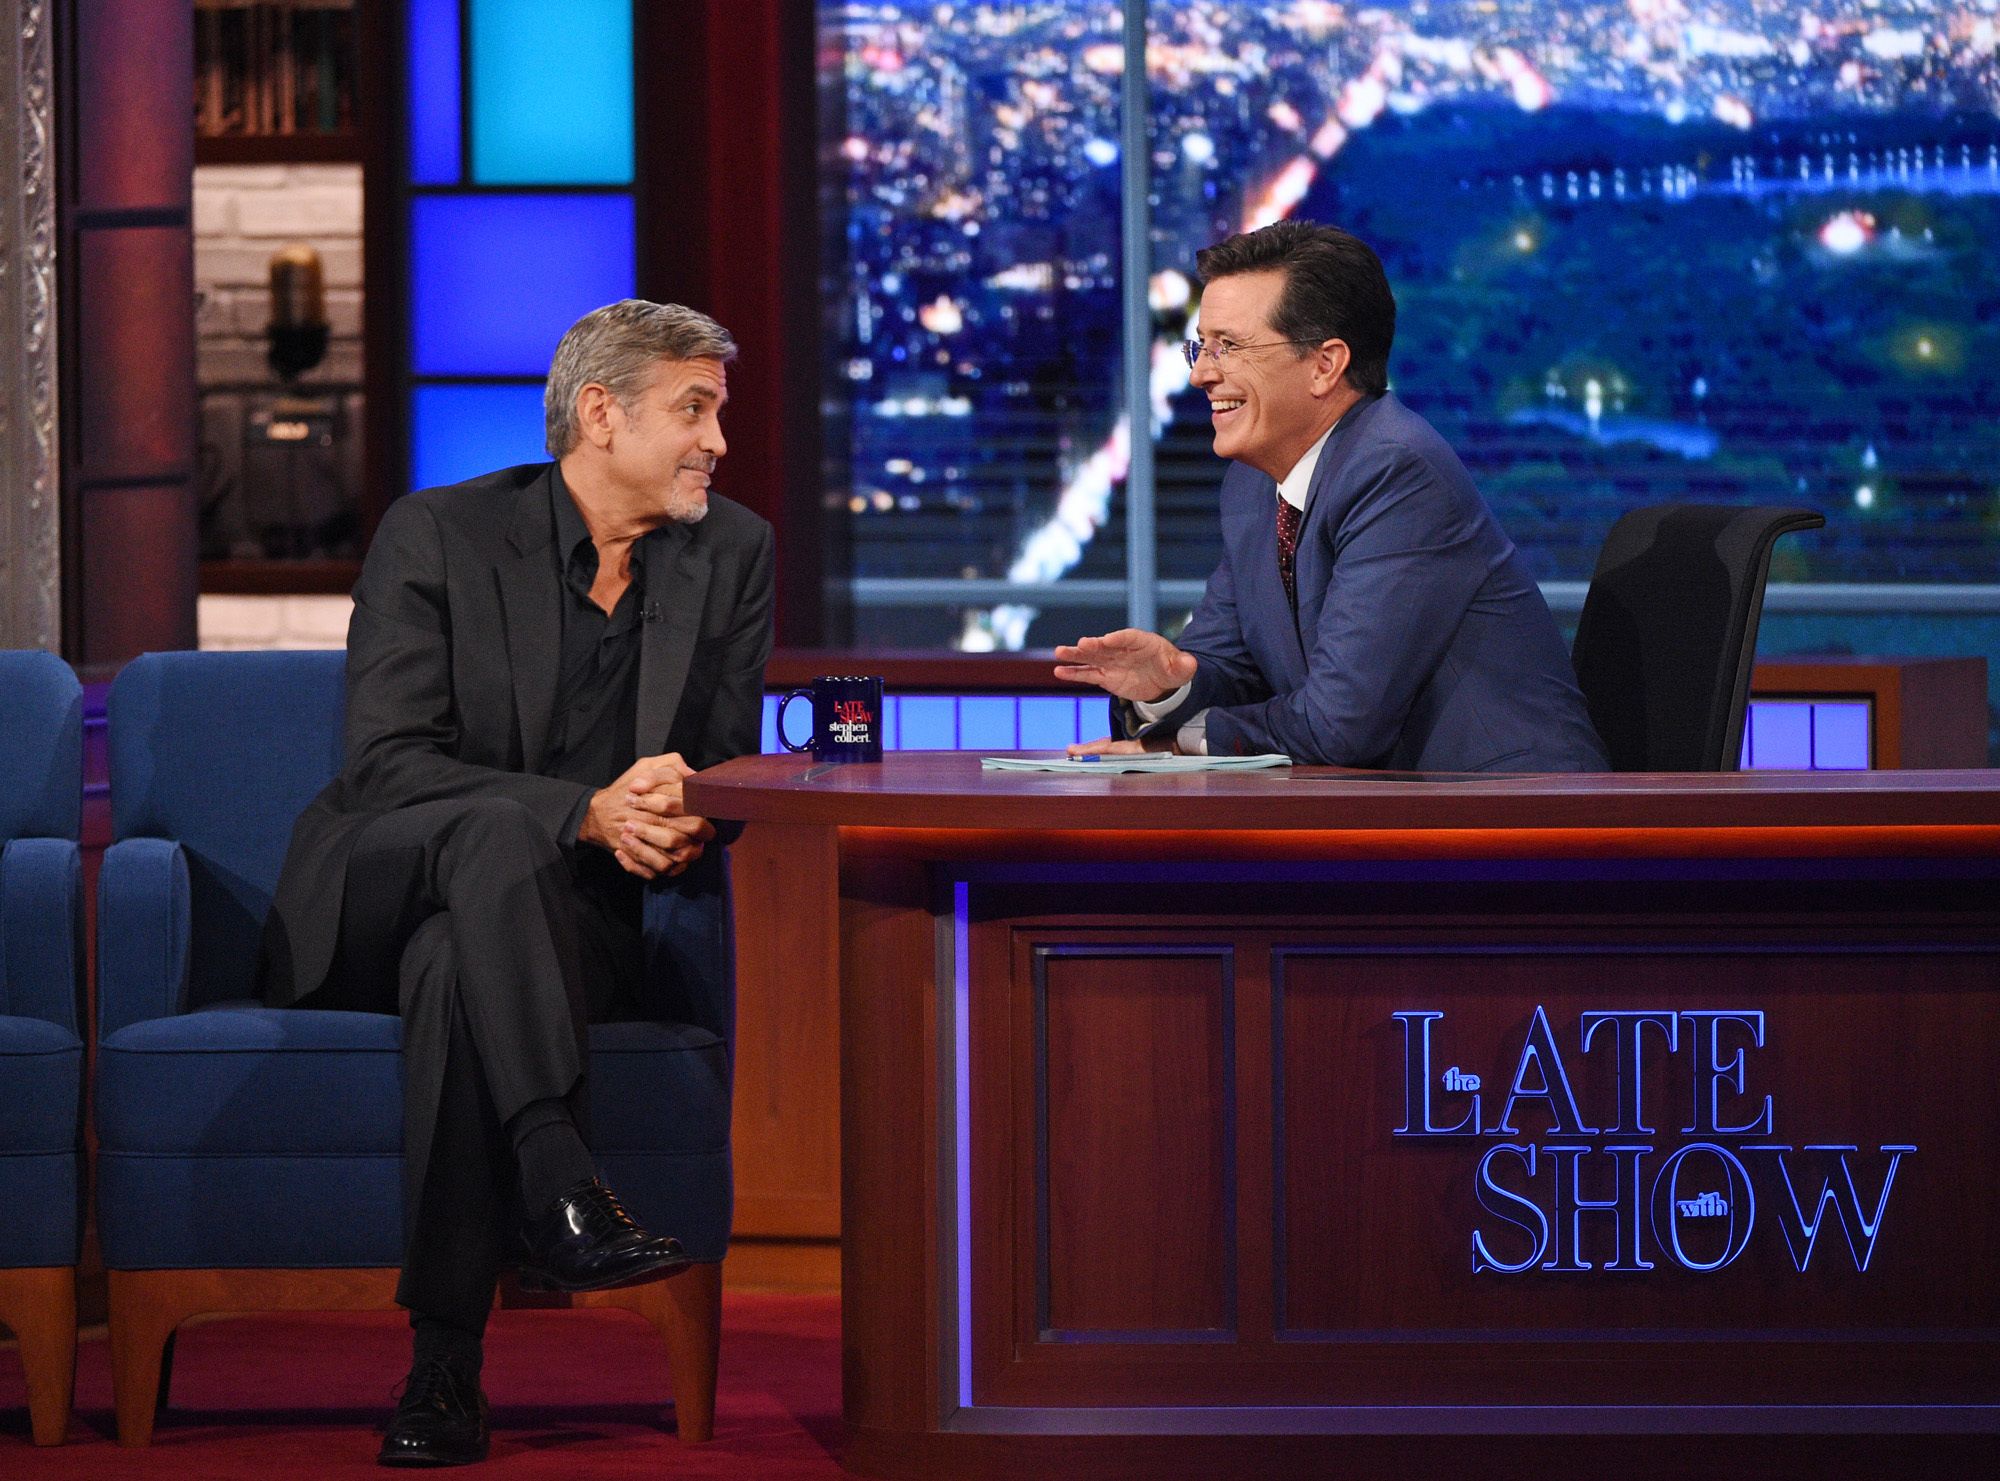 George Clooney faces Stephen Colbert on the set of The Late Show With Stephen Colbert